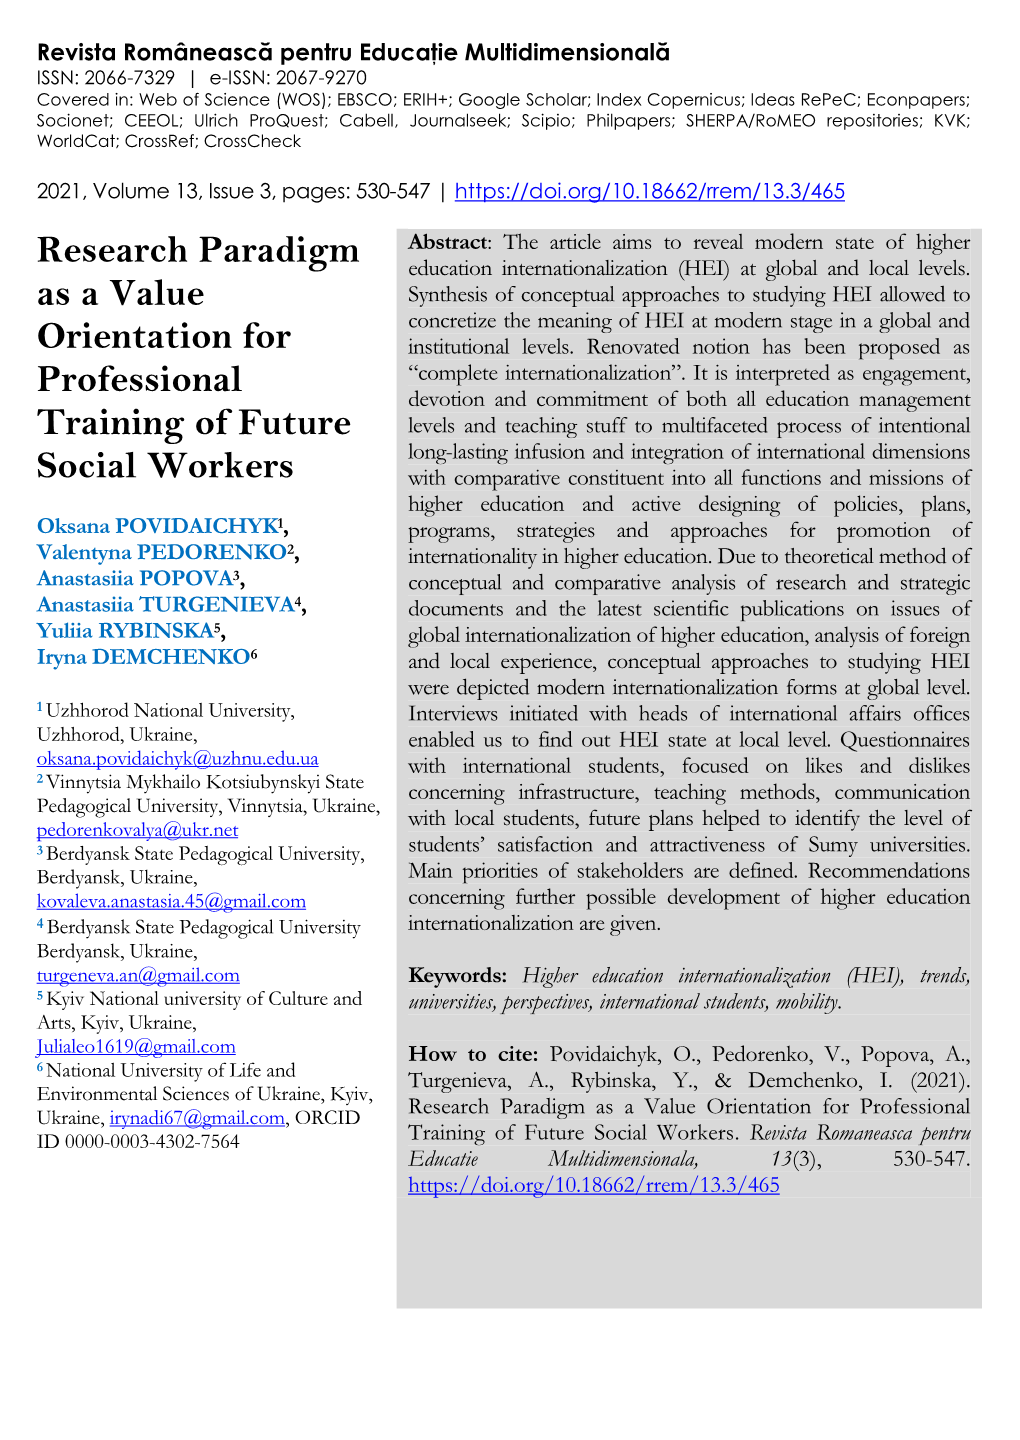 Research Paradigm As a Value Orientation for Professional ID 0000-0003-4302-7564 Training of Future Social Workers